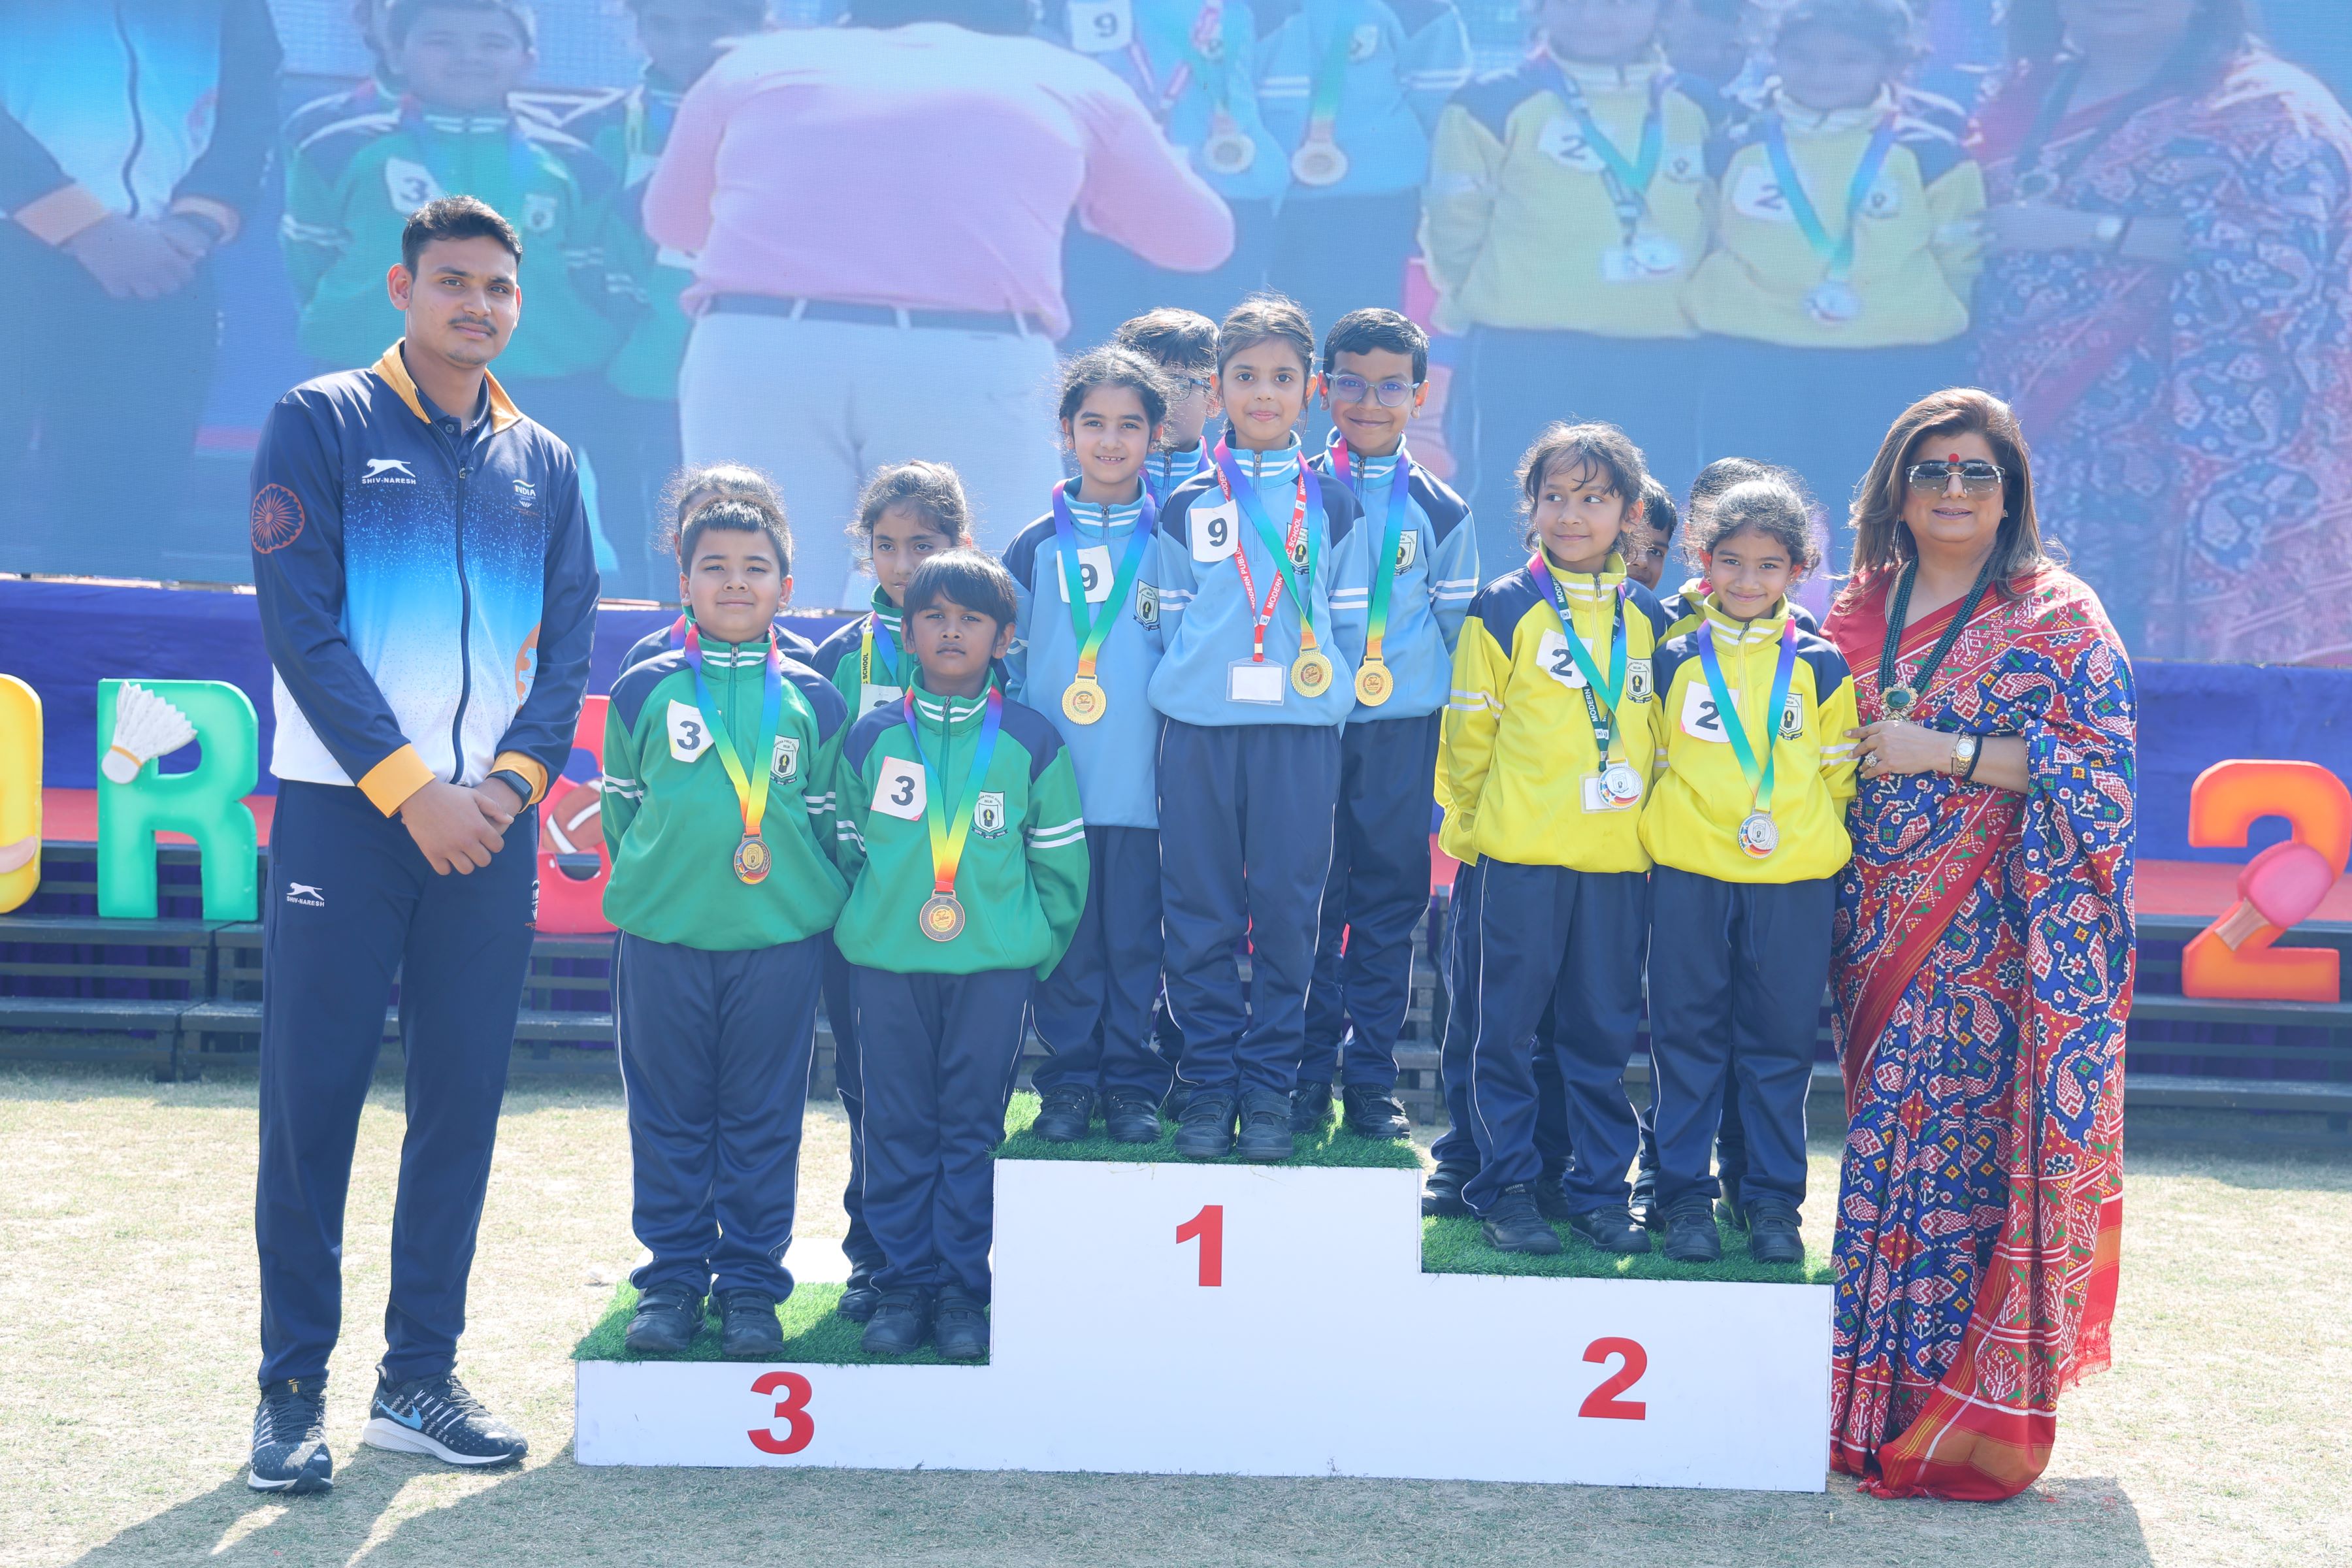 MPS celebrates Annual Sports Day to foster holistic development in students